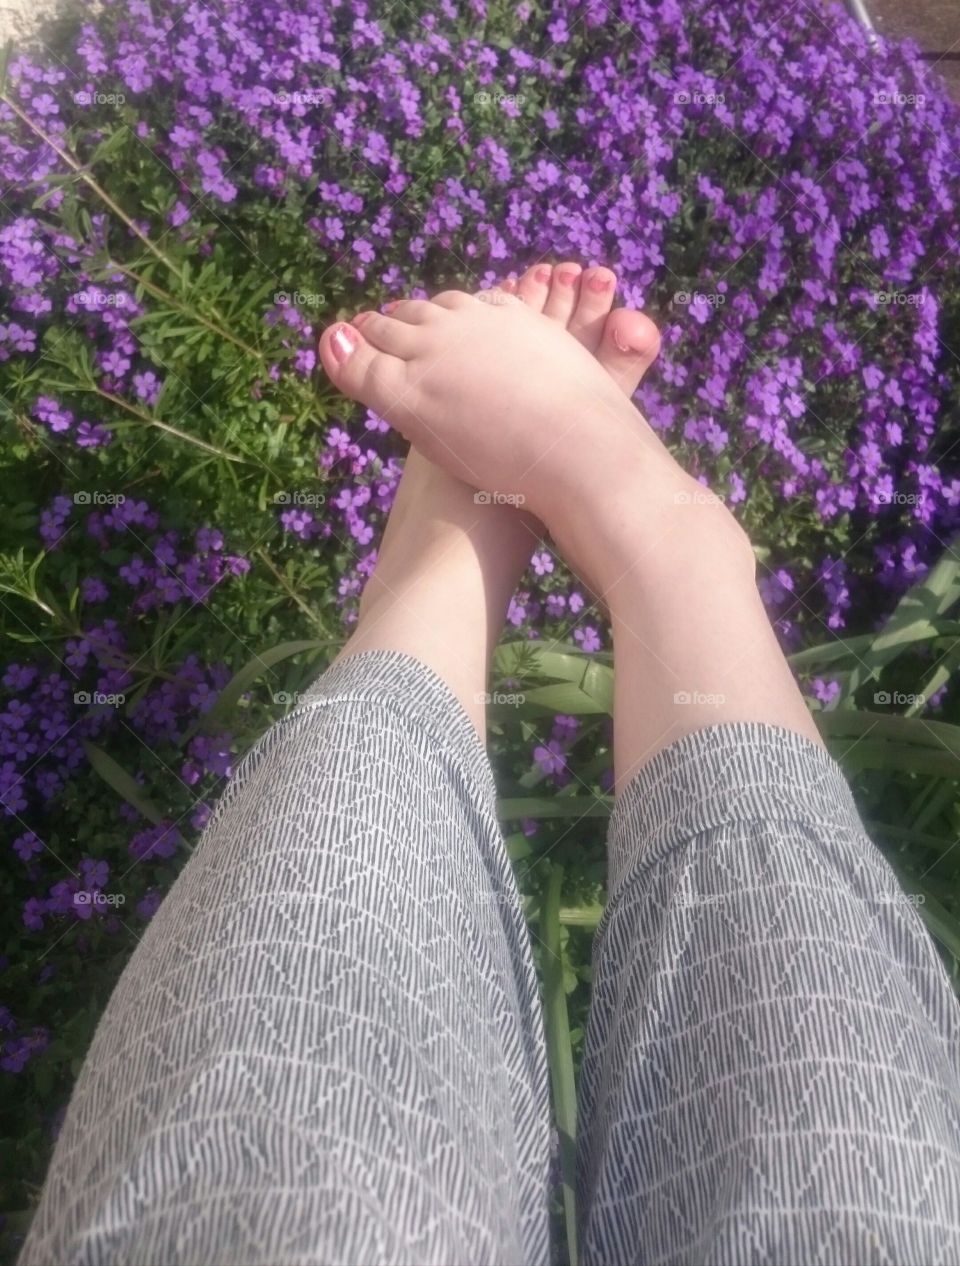 me enjoying the spring with feet on flowers